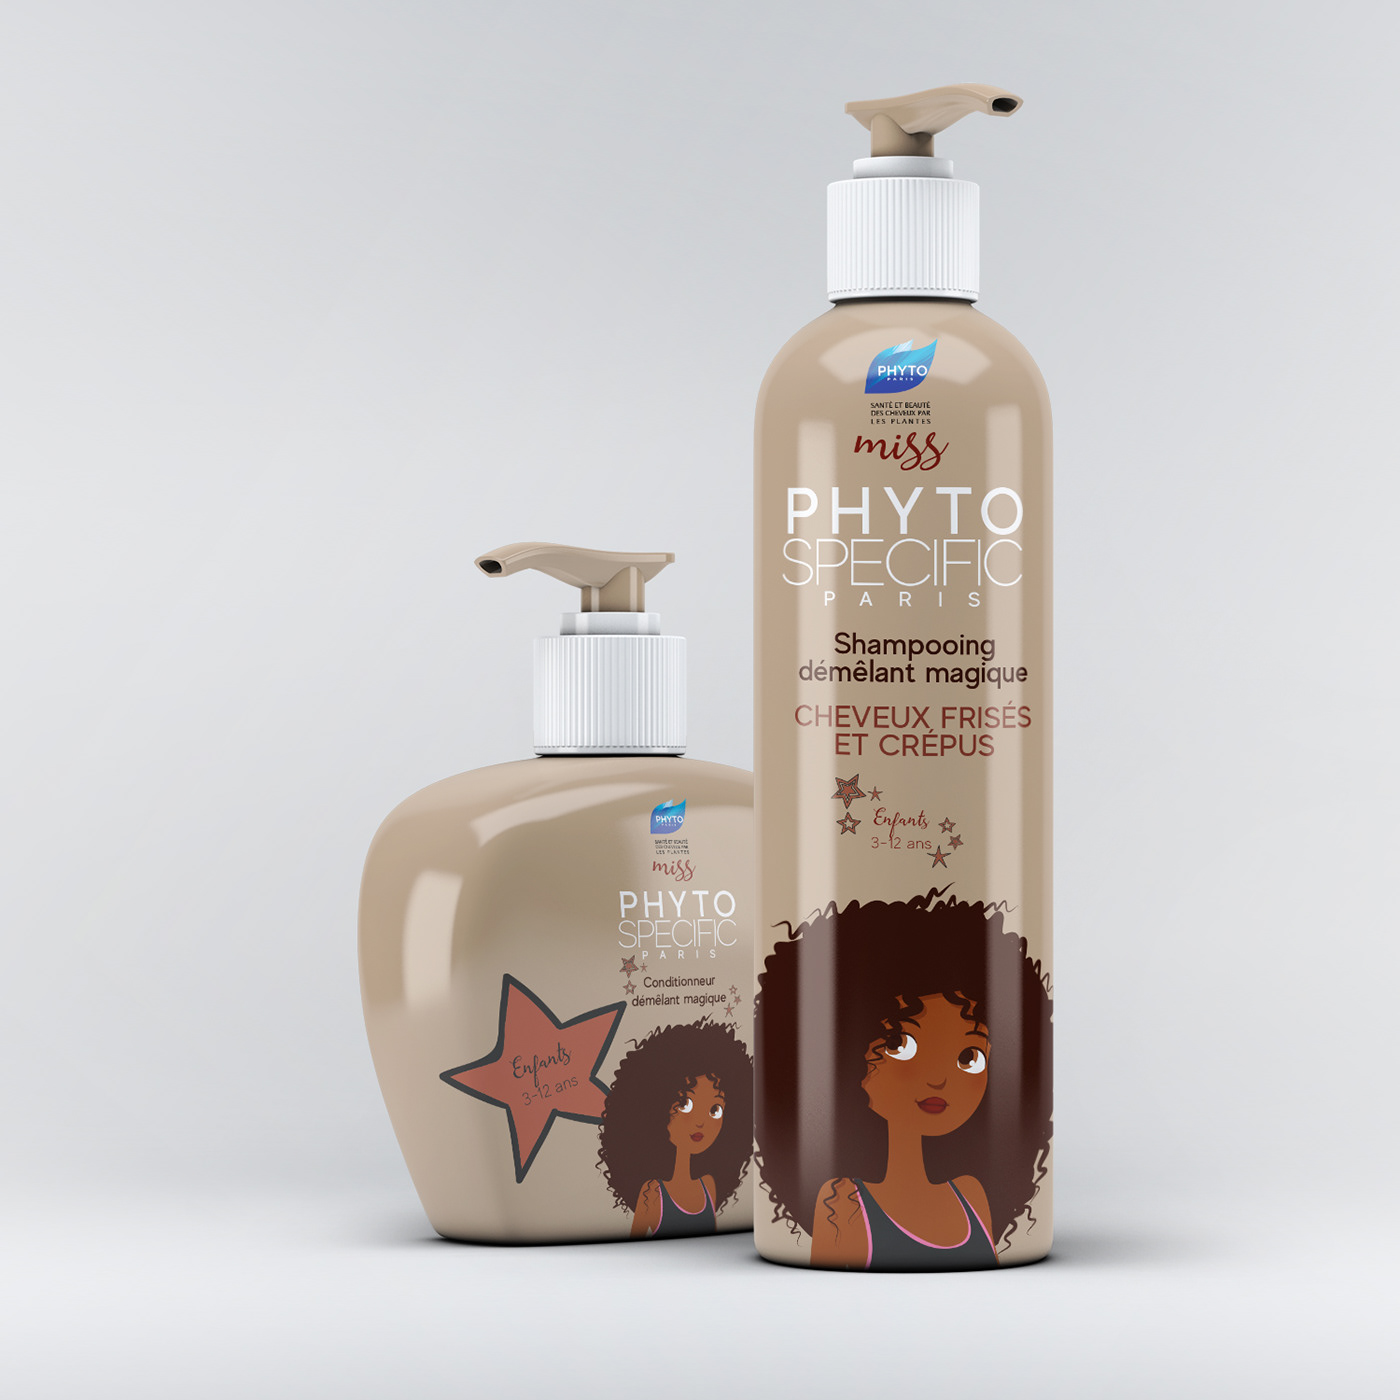 branding  design hair products Advertising  phyto curly graphic cute girly